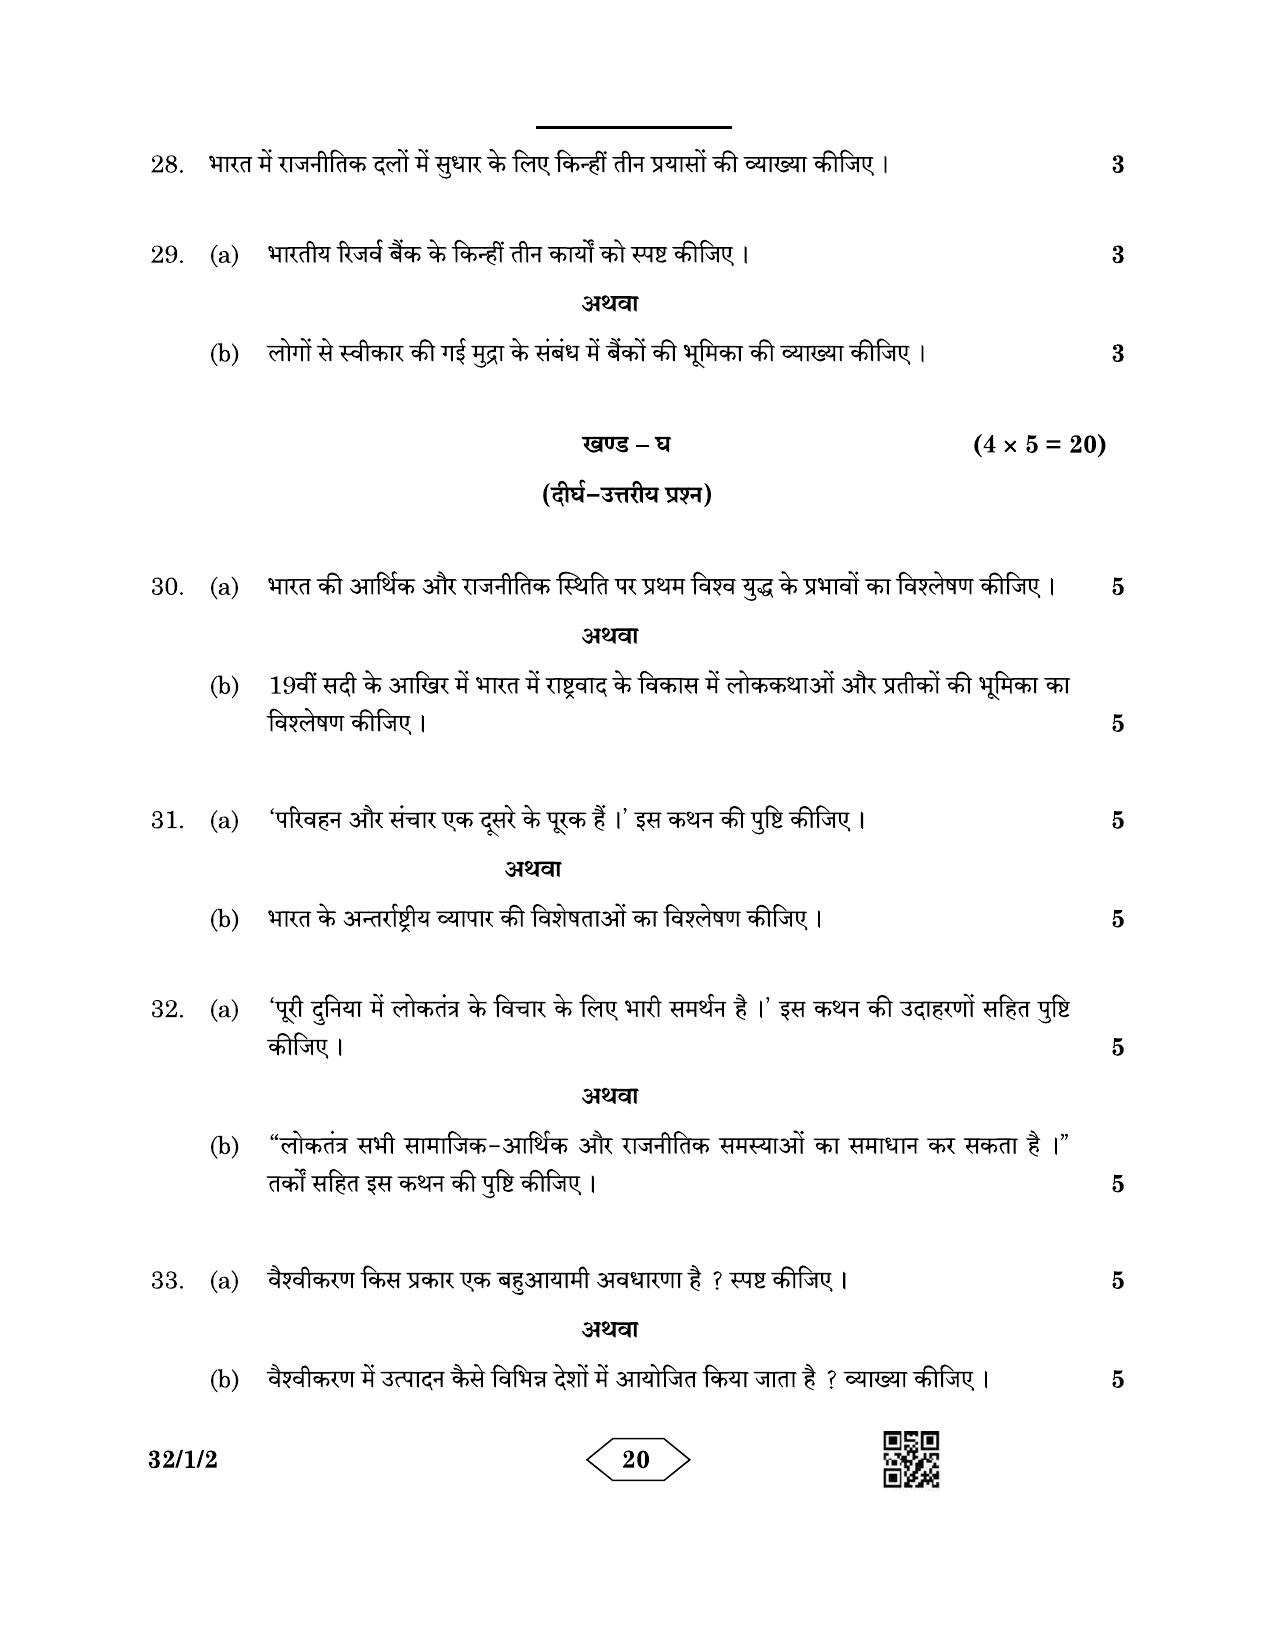 CBSE Class 10 32-1-2 Social Science 2023 Question Paper - Page 20